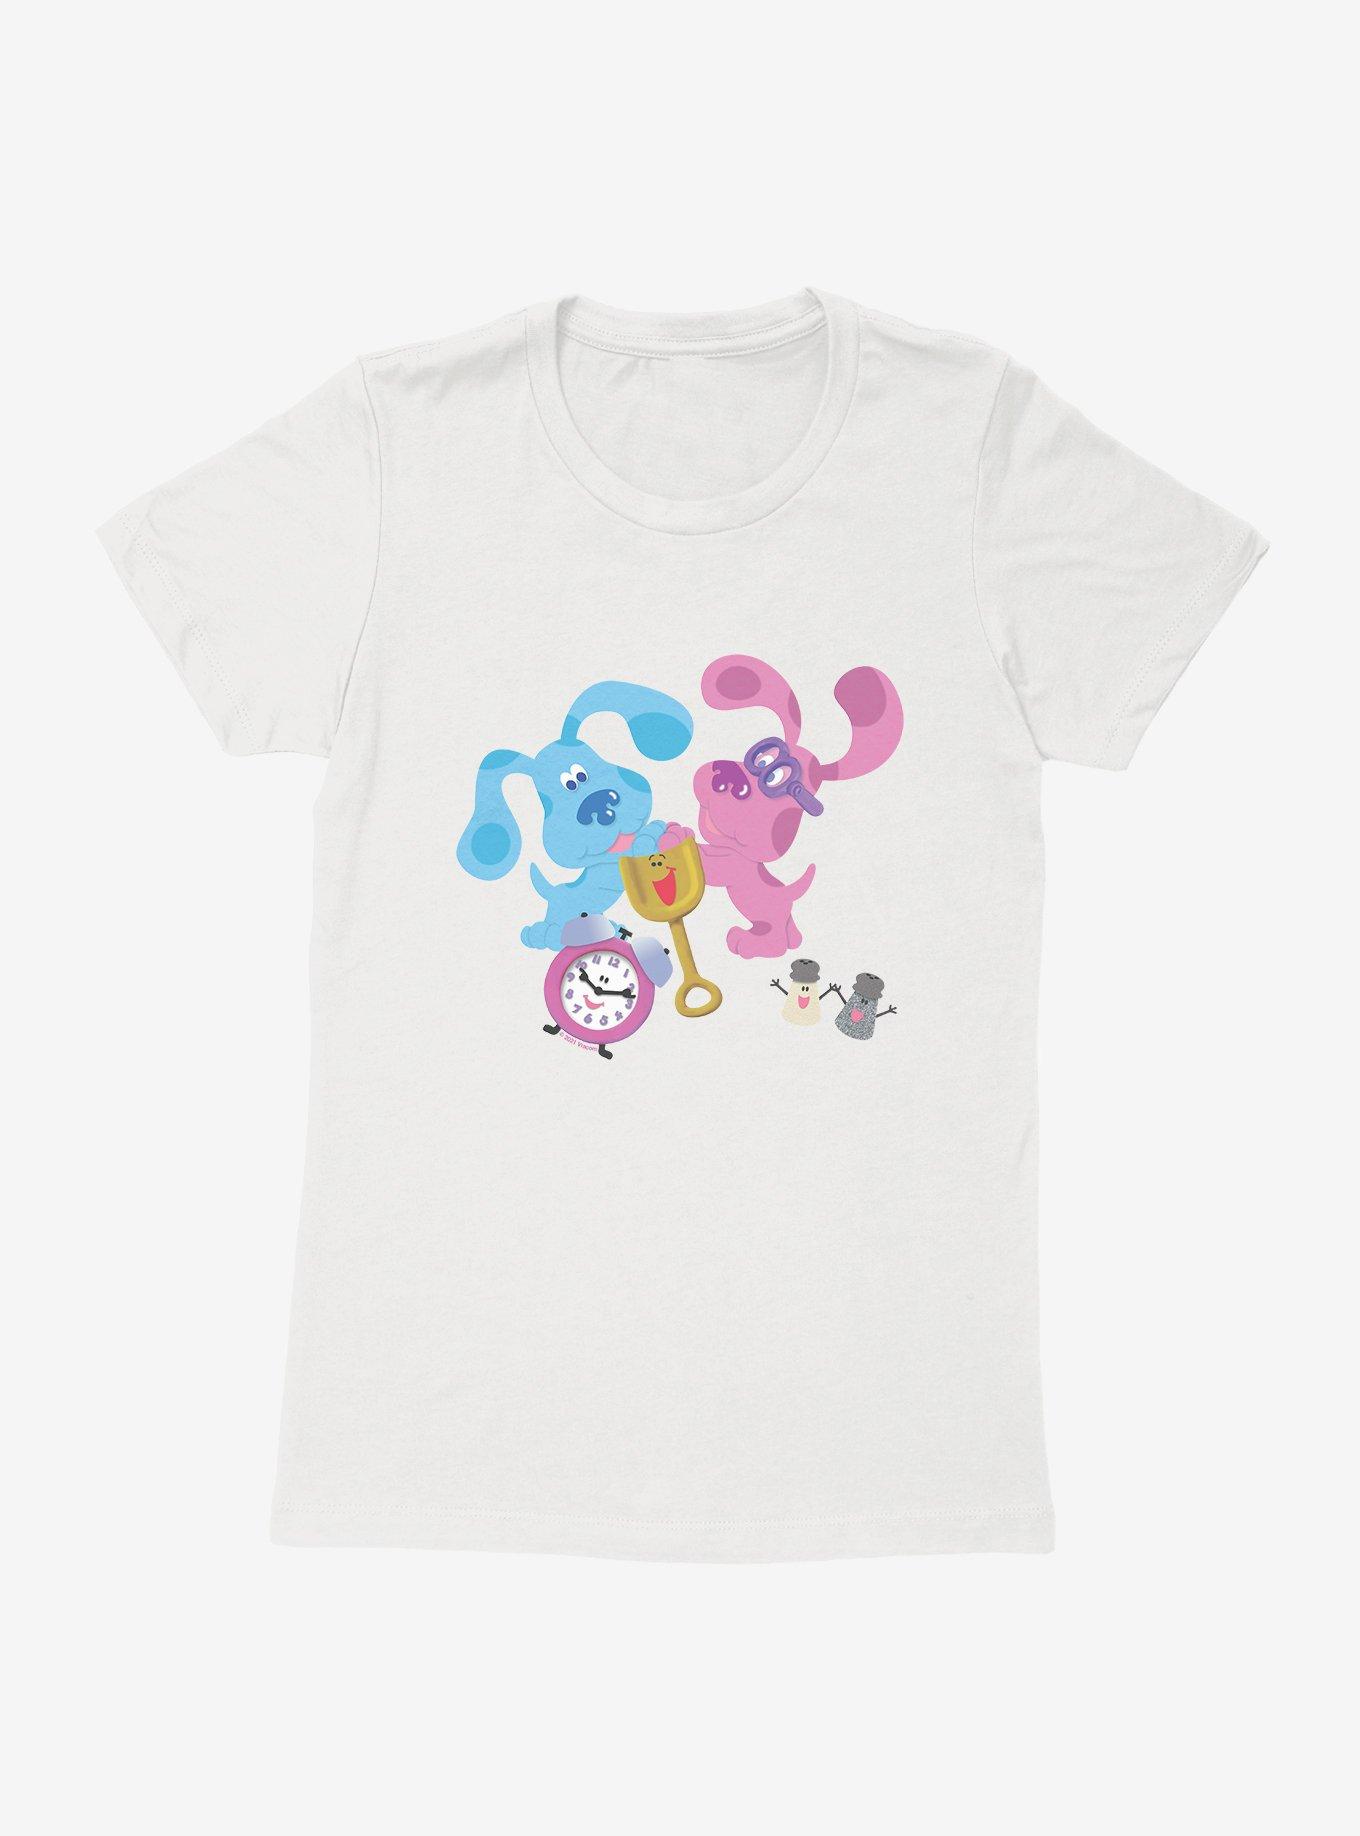 Blue's Clues Playful Group Womens T-Shirt, WHITE, hi-res